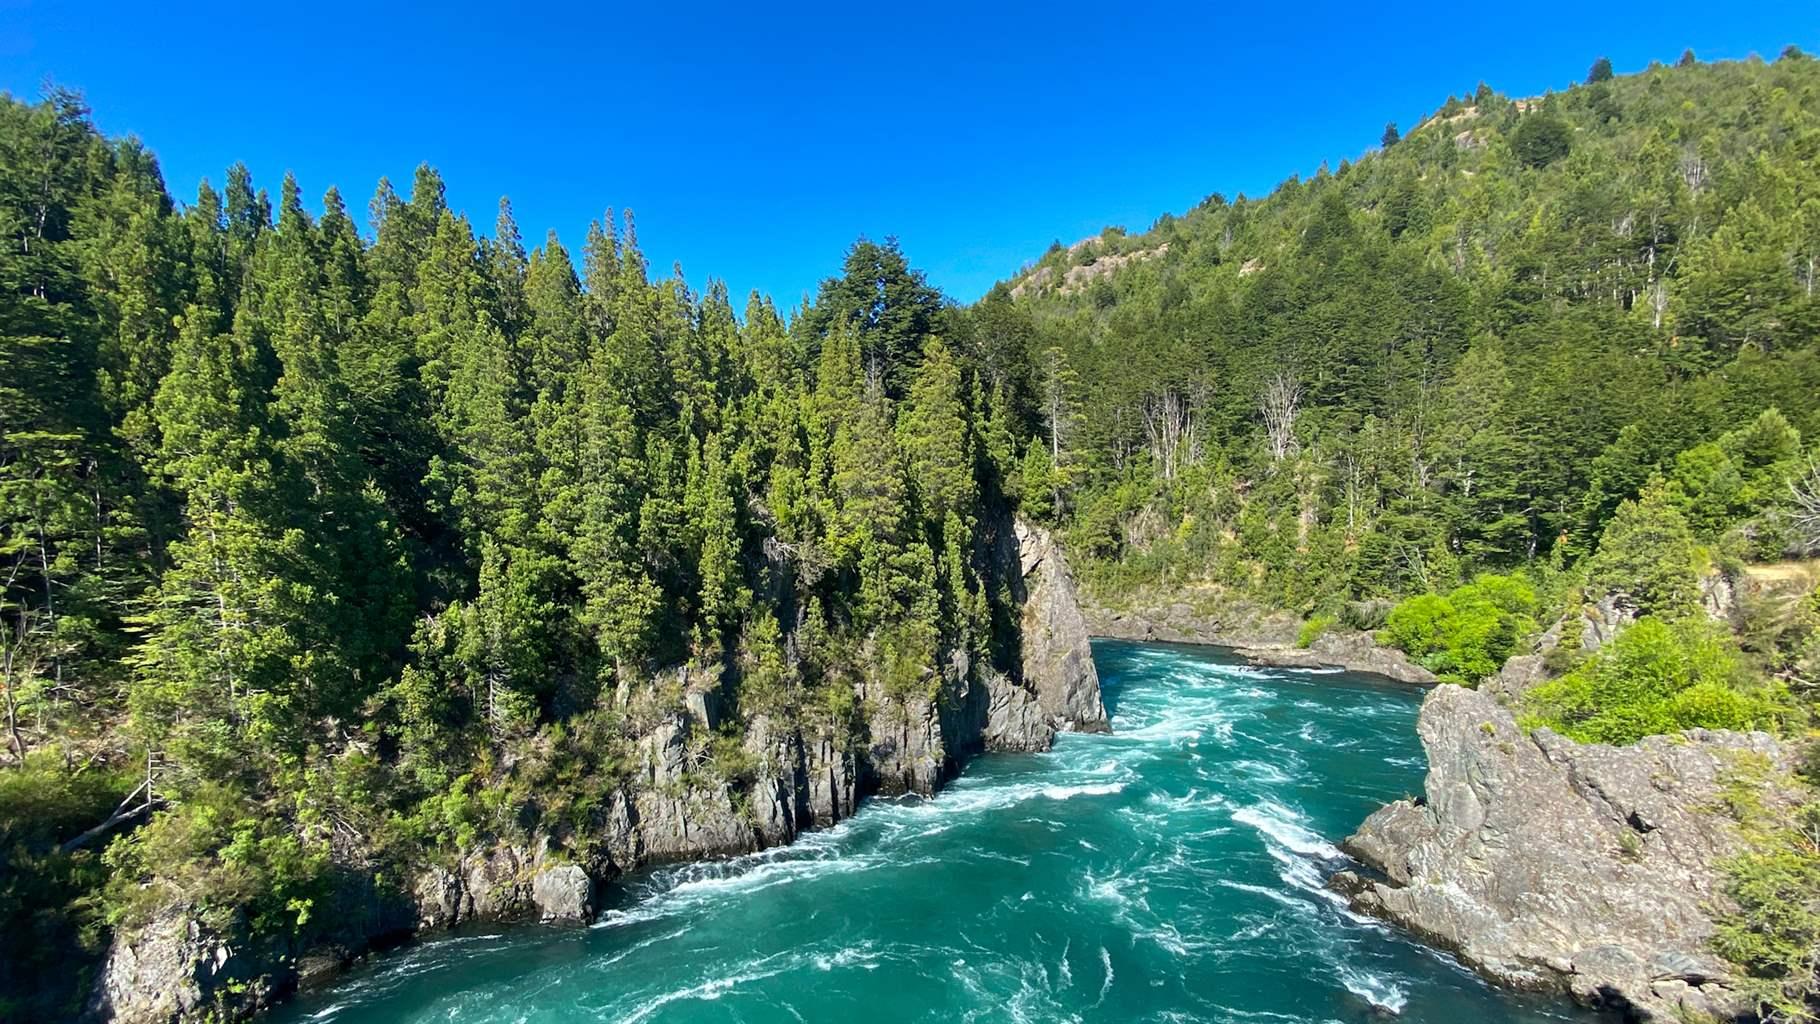 Tree-topped rocky outcroppings border the swirling, white-tipped turquoise waters of Chile’s Futaleufú River.